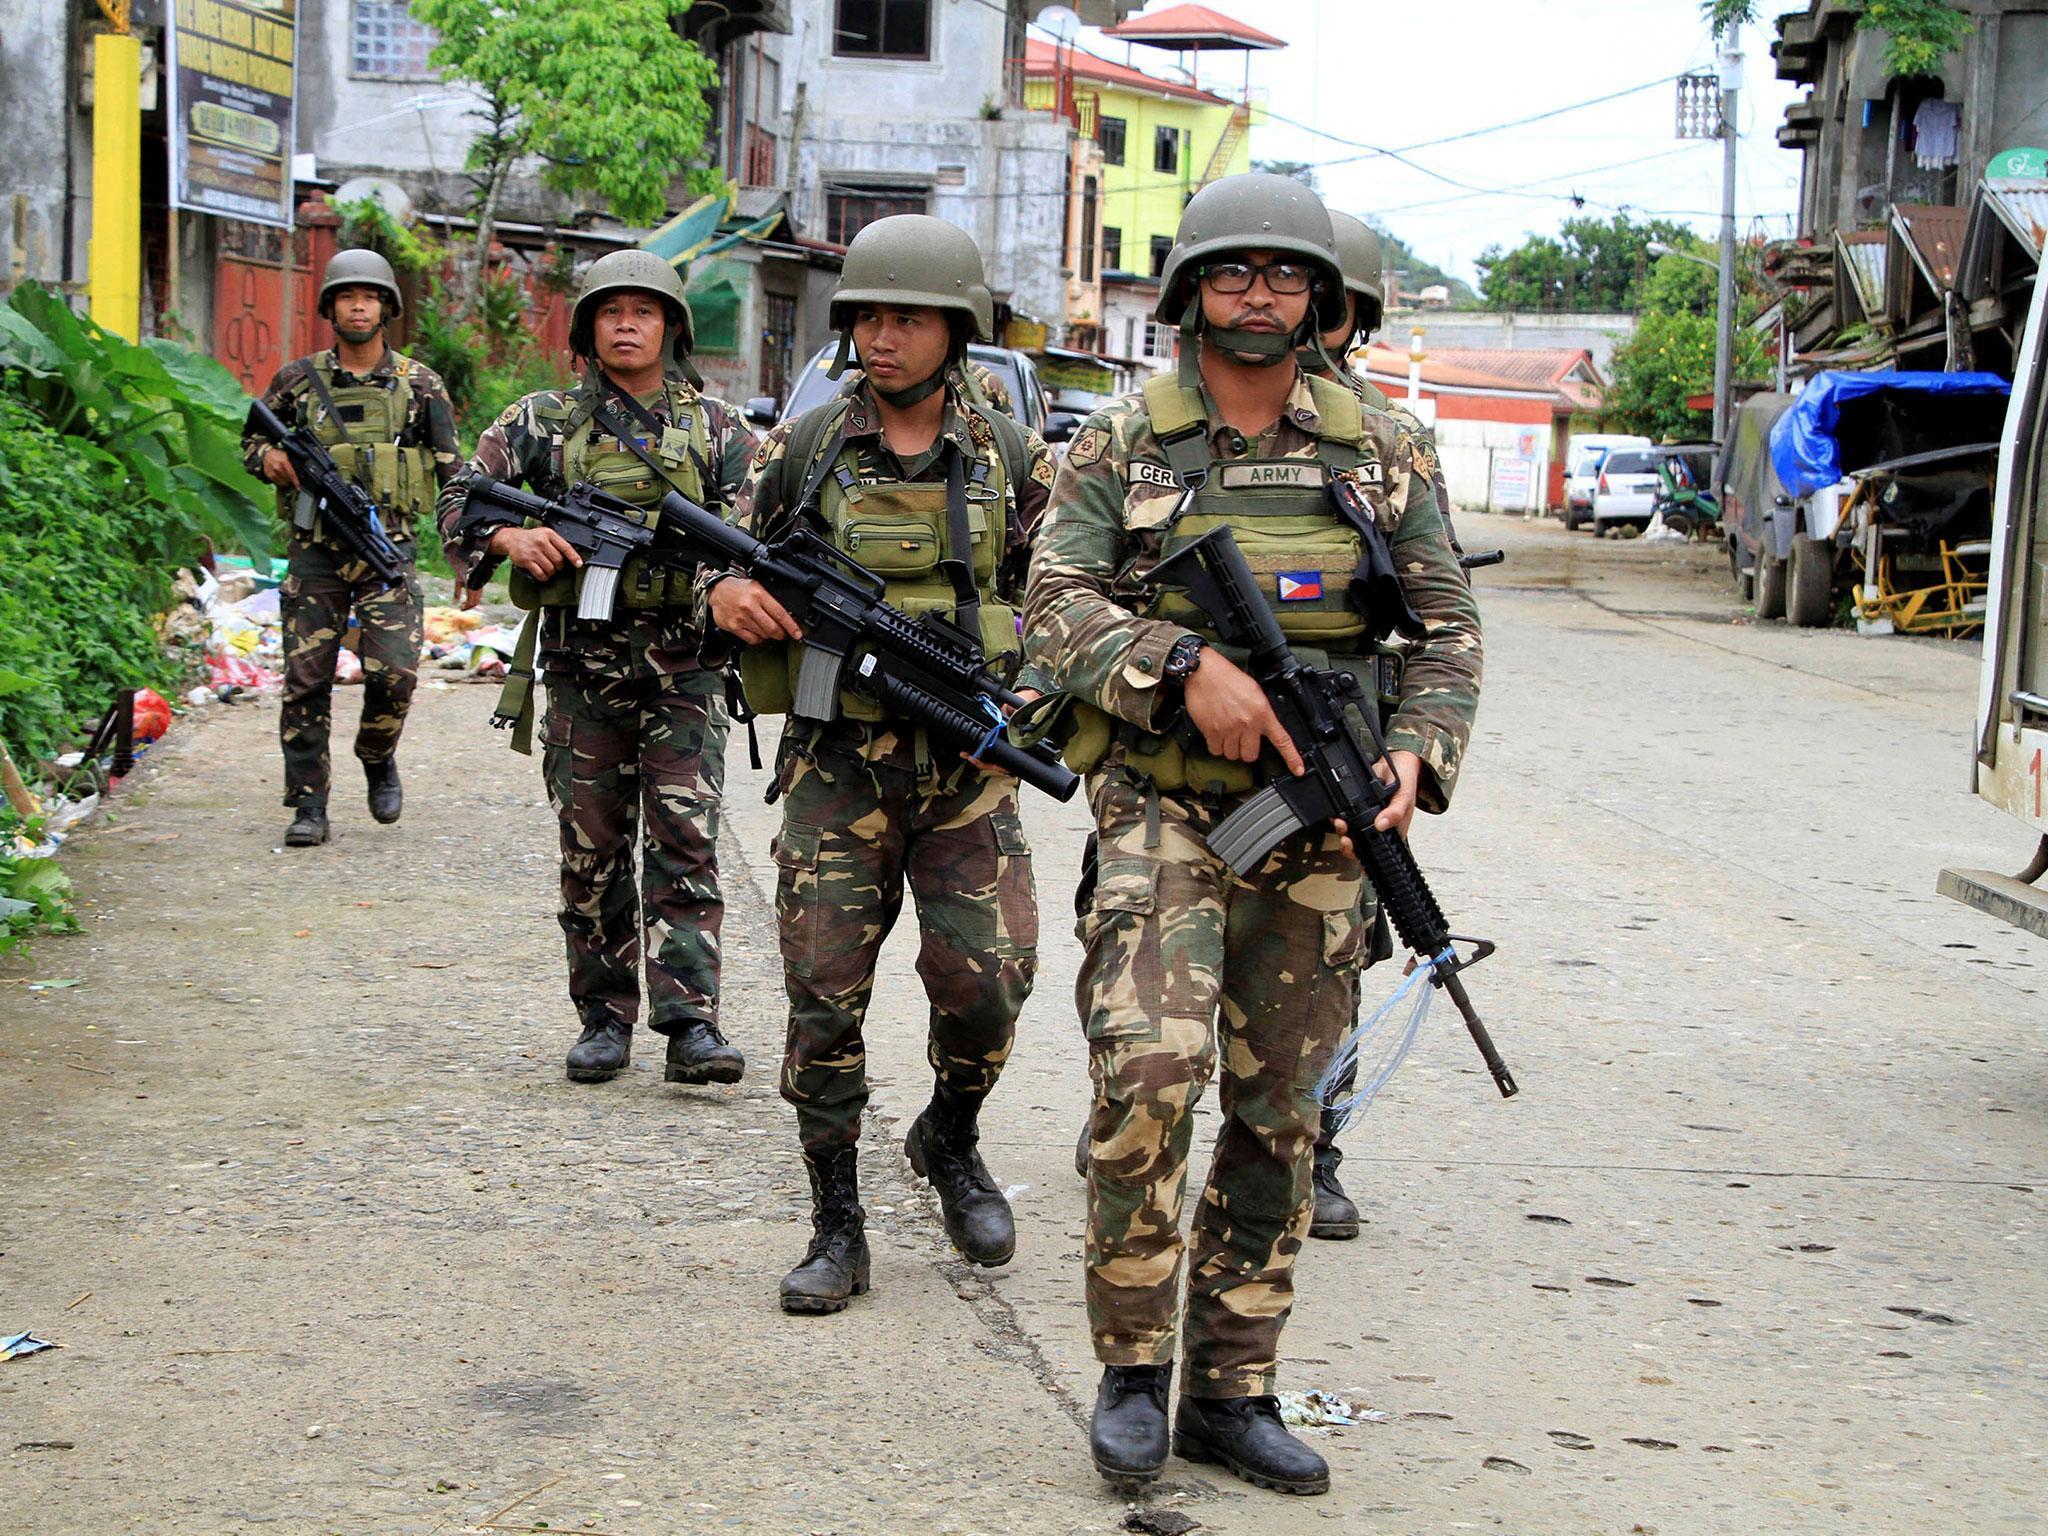 A joint group of police and military forces on foot patrol conduct a house to house search as part of clearing operations in different sections of Marawi city, Philippines